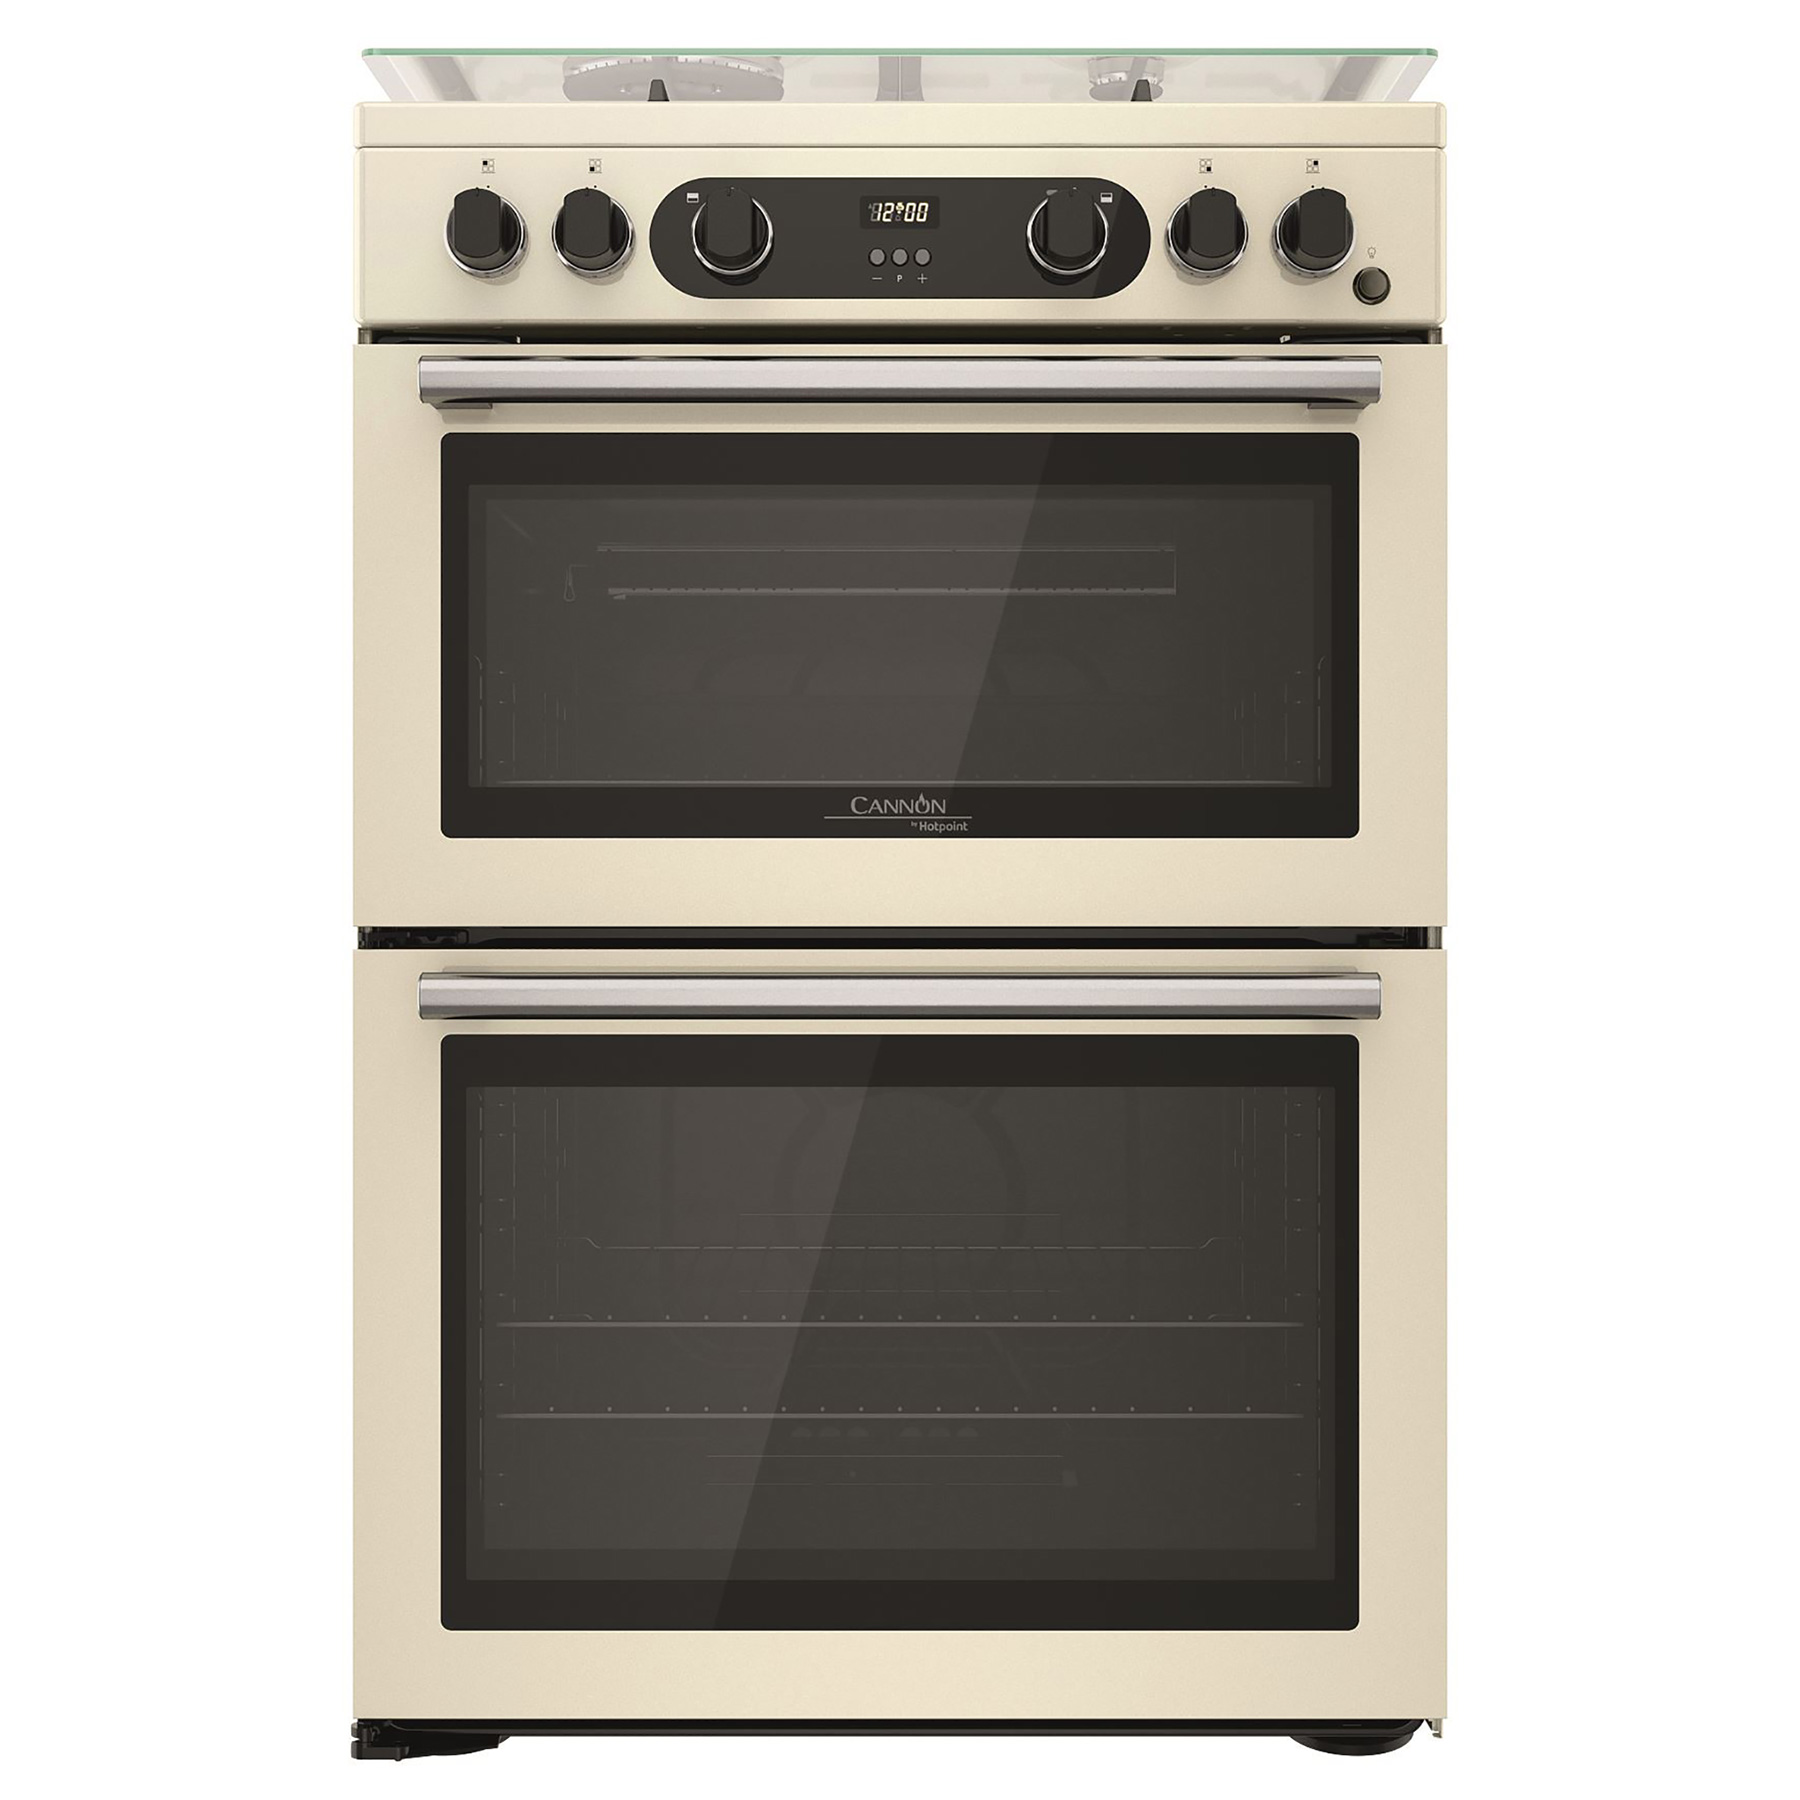 Image of Hotpoint CD67G0C2CJ 60cm Double Oven Gas Cooker in Cream 84 42L